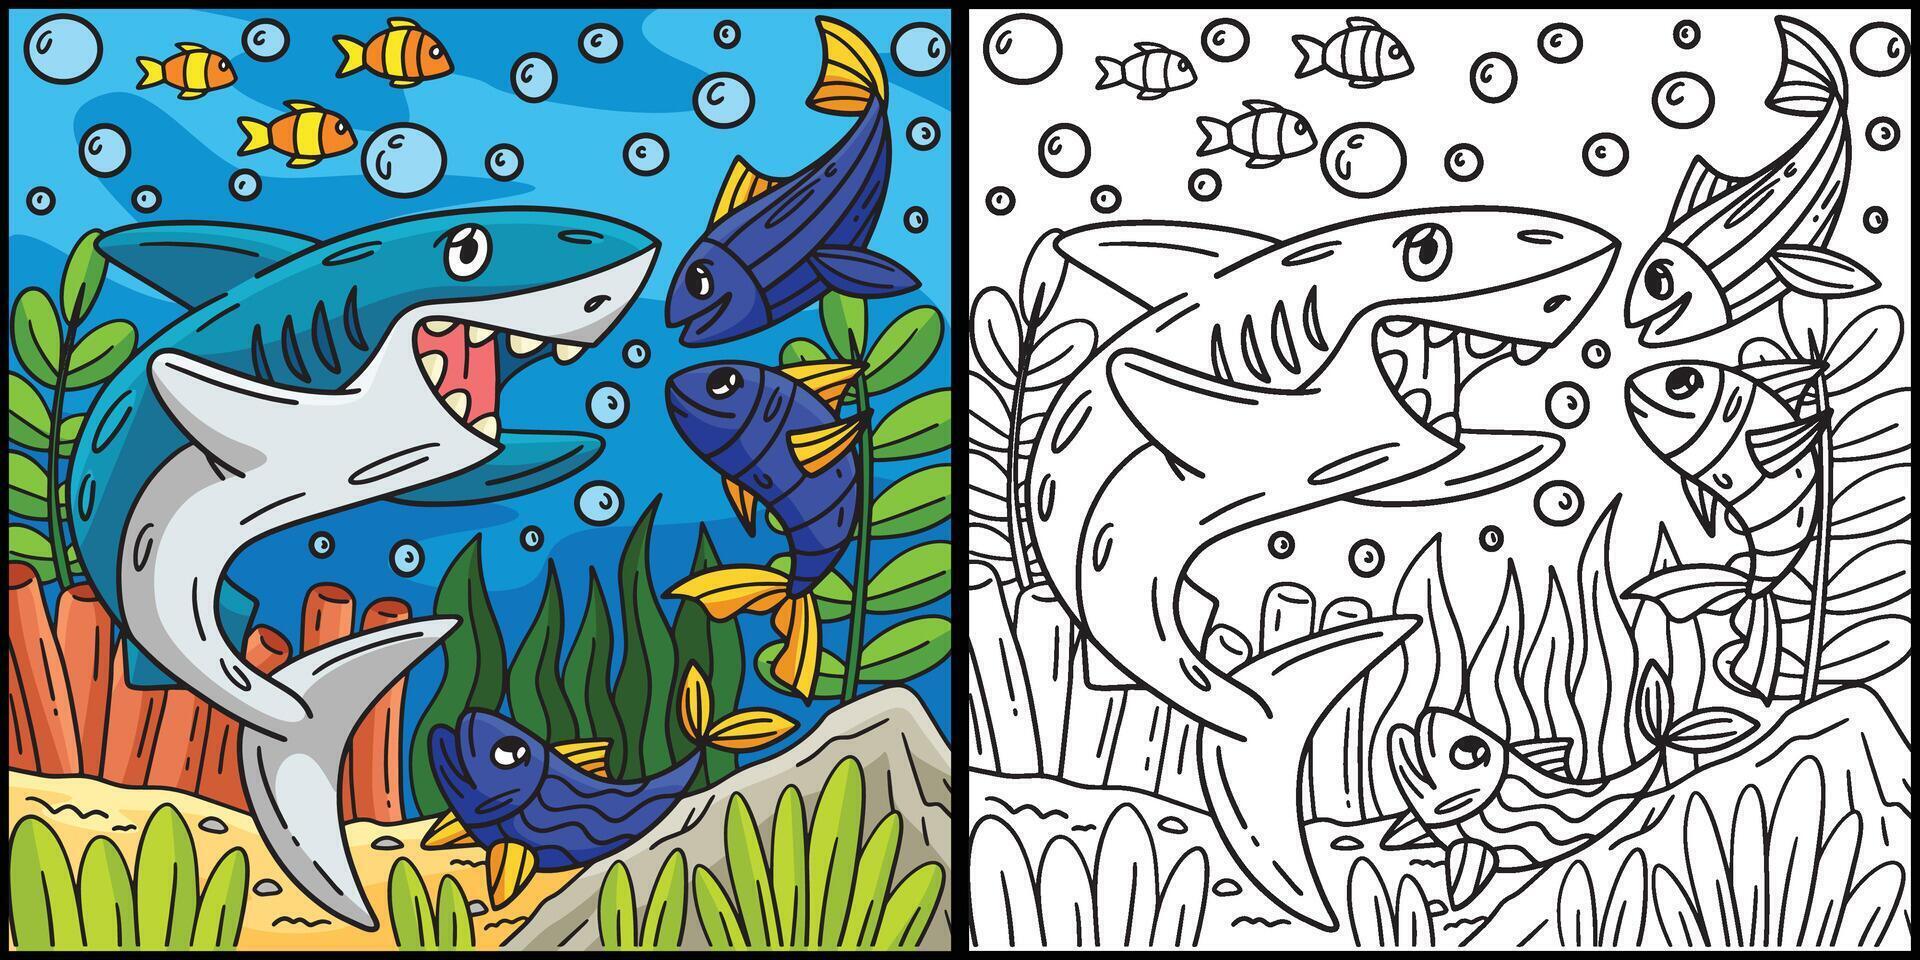 Shark and Fish Friend Coloring Page Illustration vector